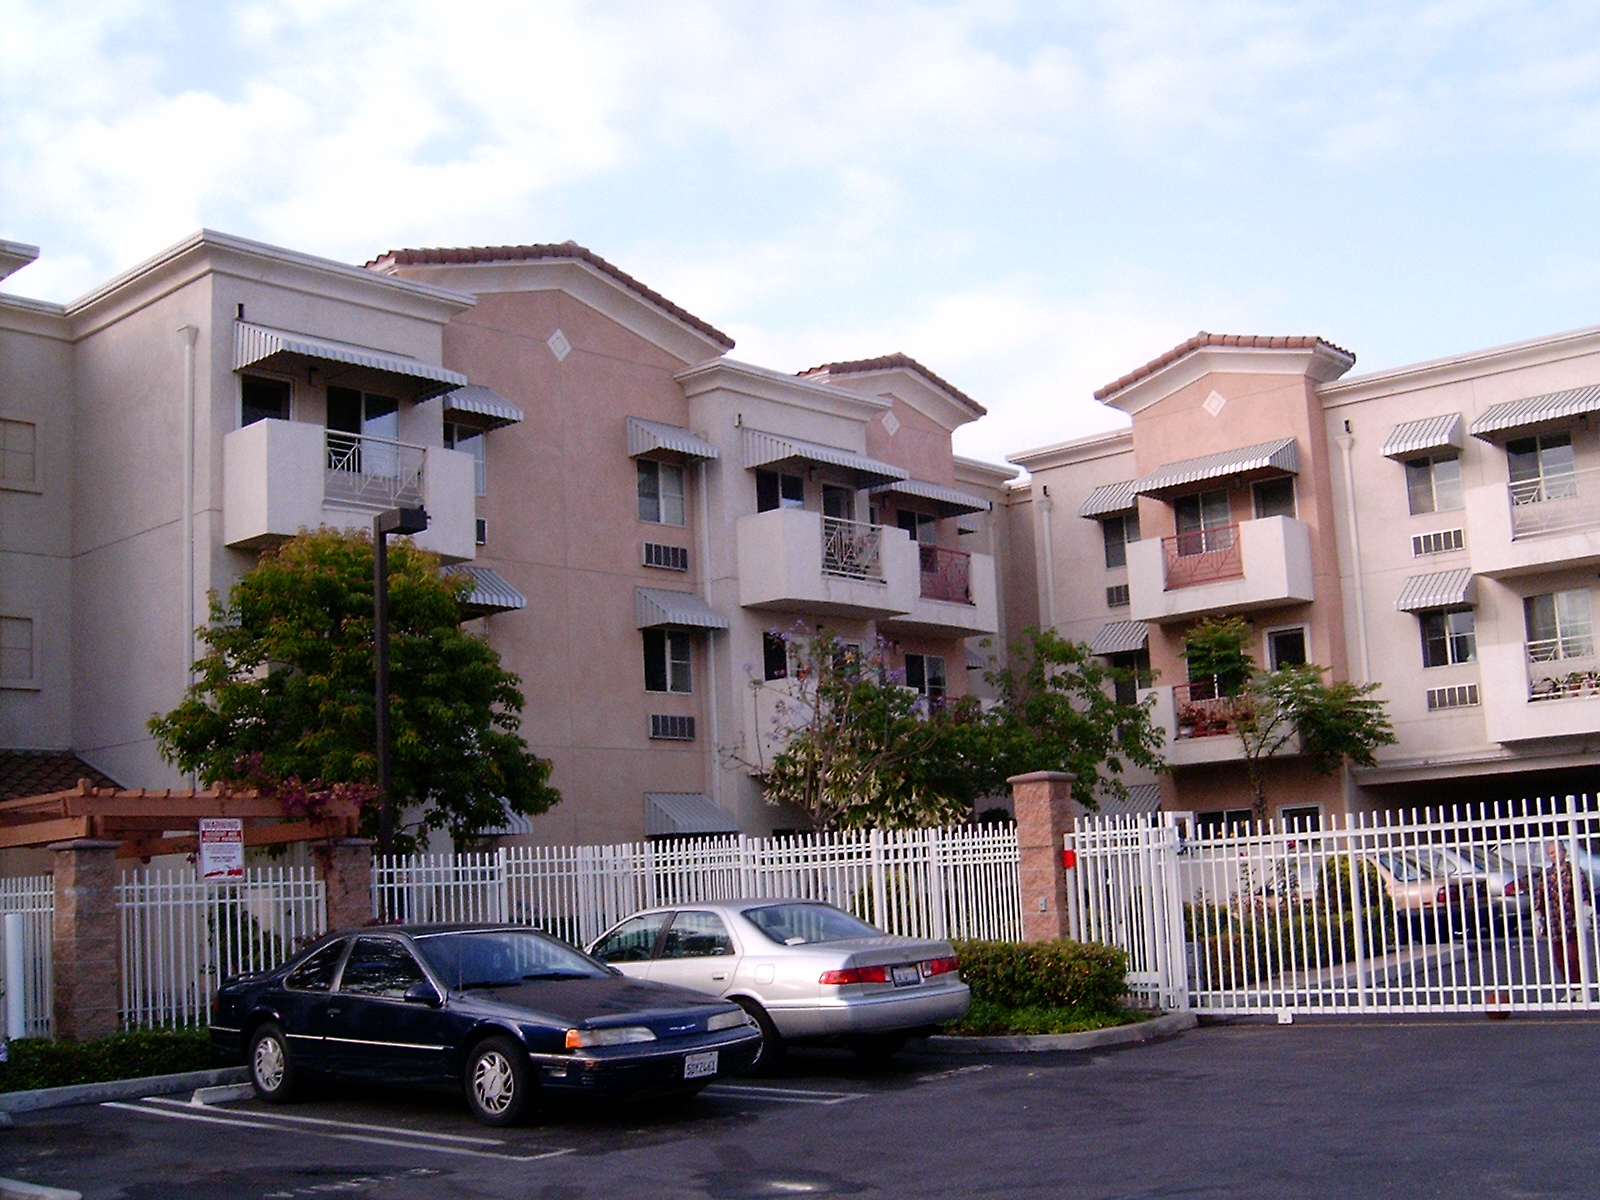 gated Three story building with outside parking on either side
of gate. Select units with balcony